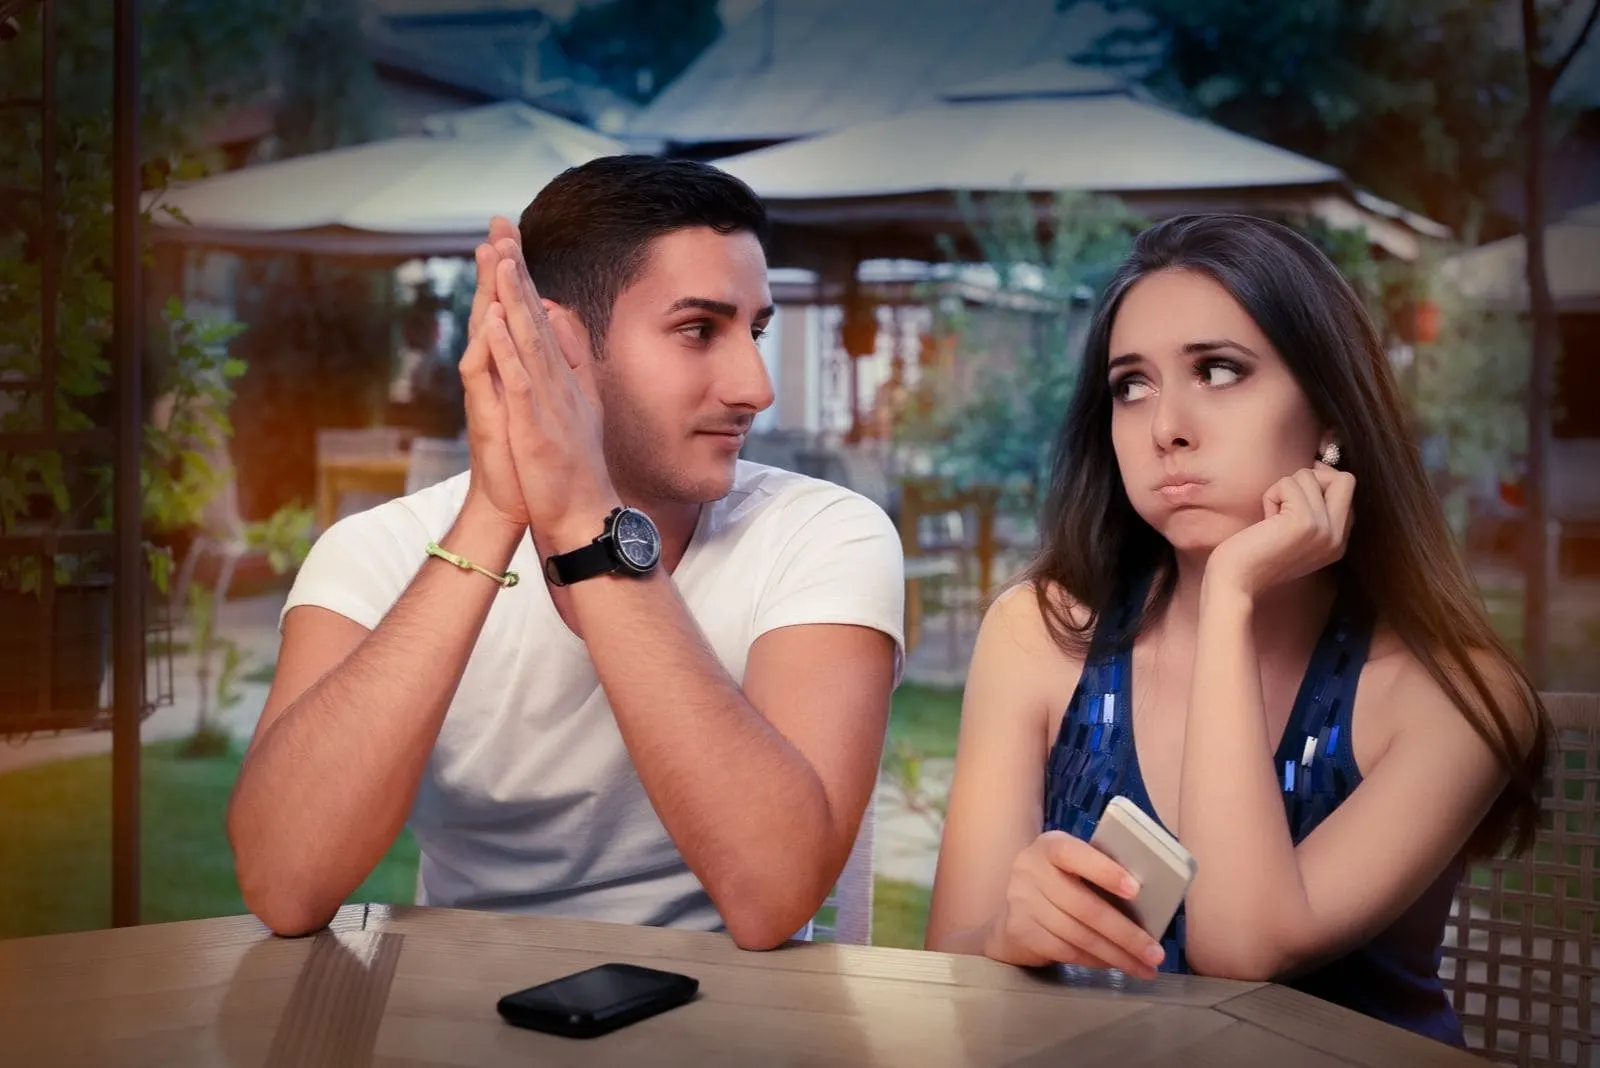 couple having problem with smartphone in an outdoor cafe with woman in disbelief expression